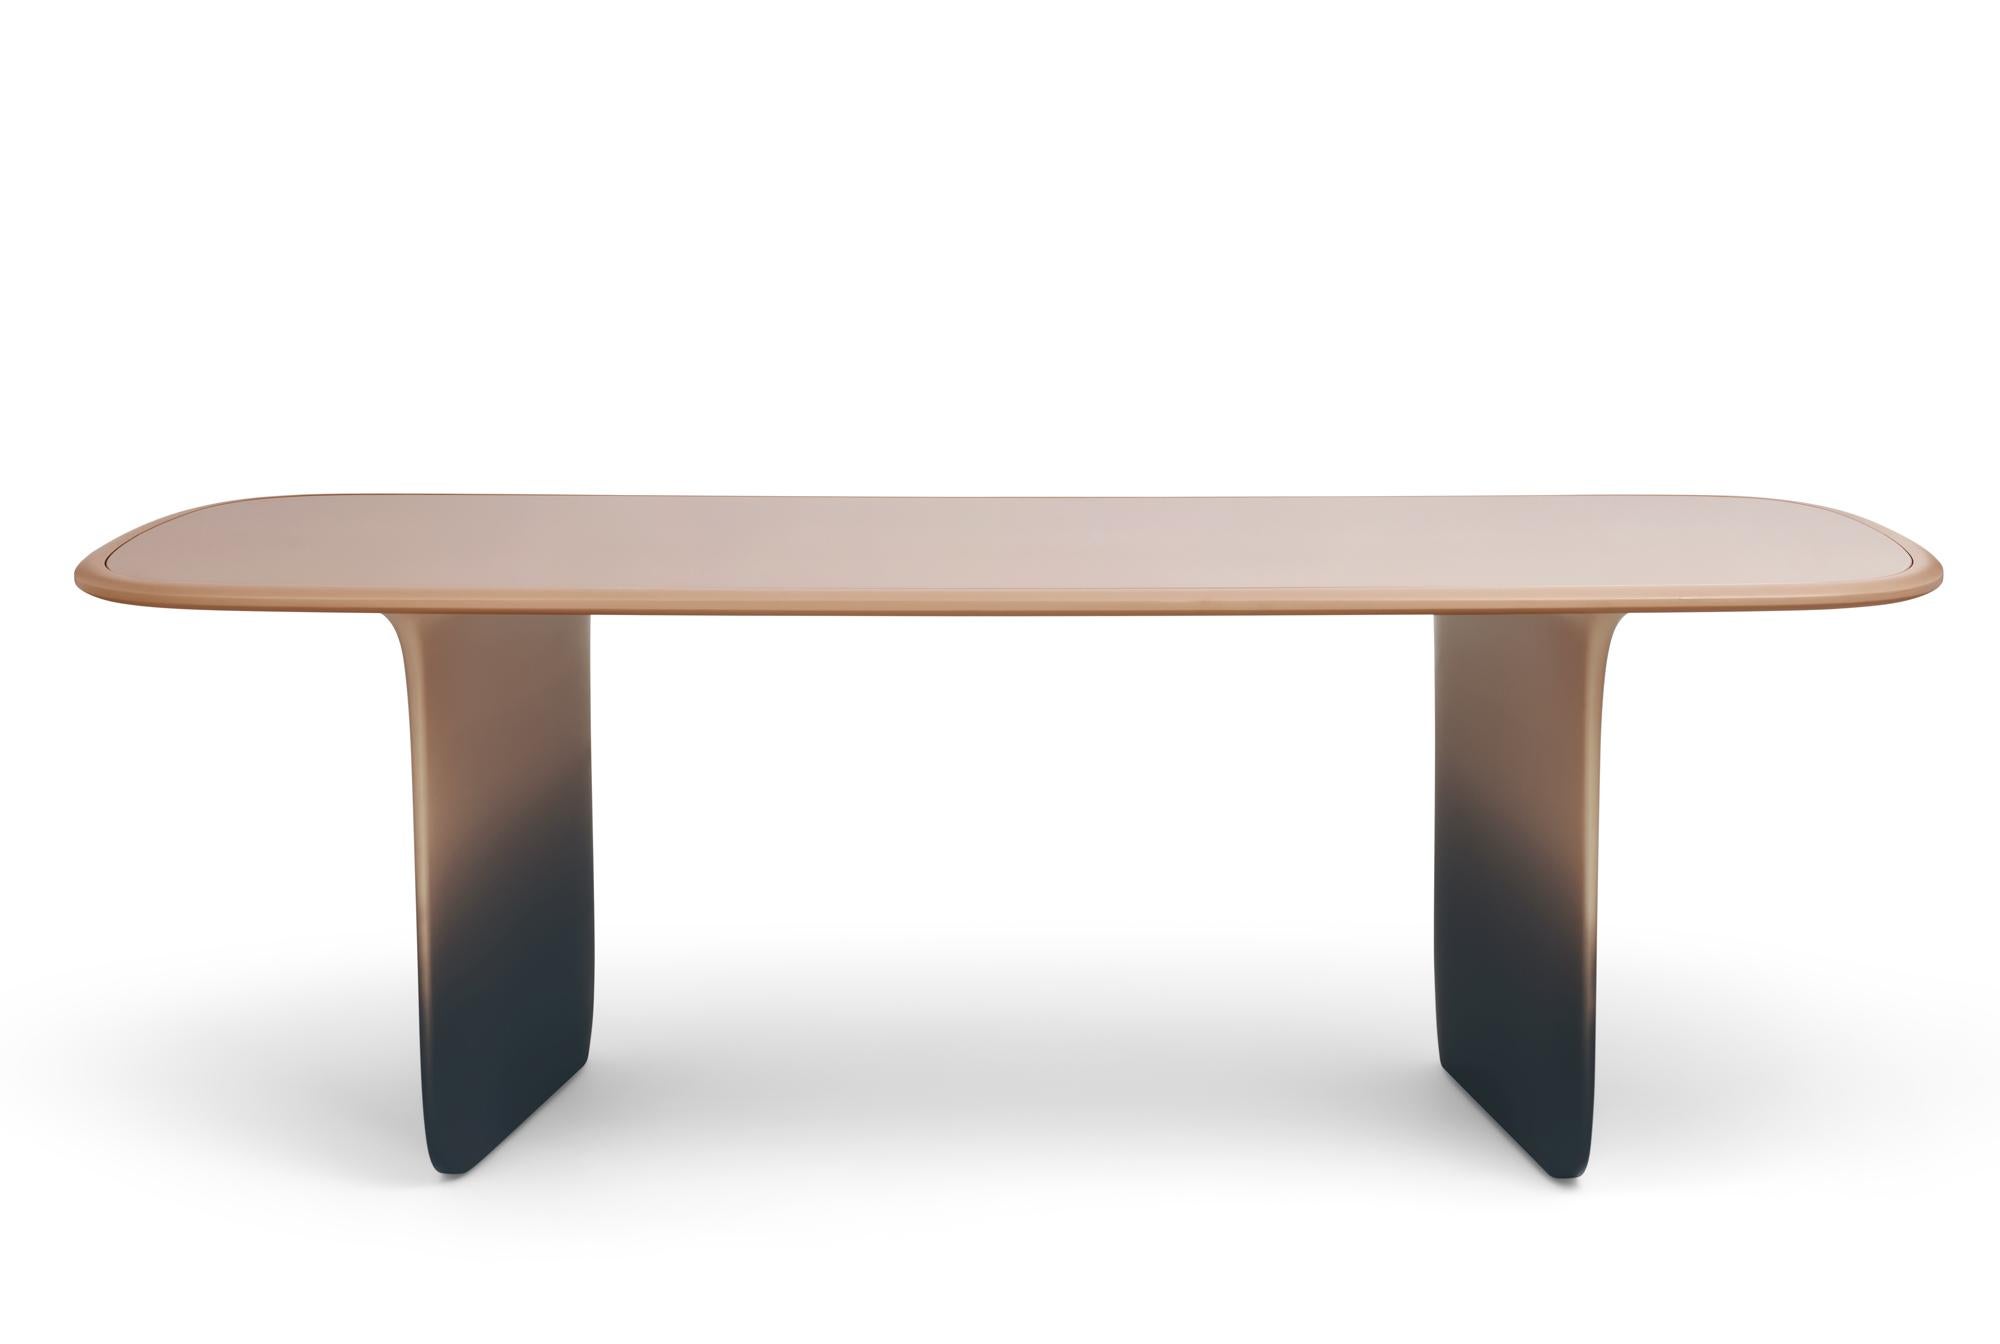 O dining table, design by Matteo Cibic, product by Scapin Collezioni

The shaded lacquering technique gives the thin legs of the table a striking geometric lightness and makes it illusion that the top is floating.
Materials: matt faded lacquered